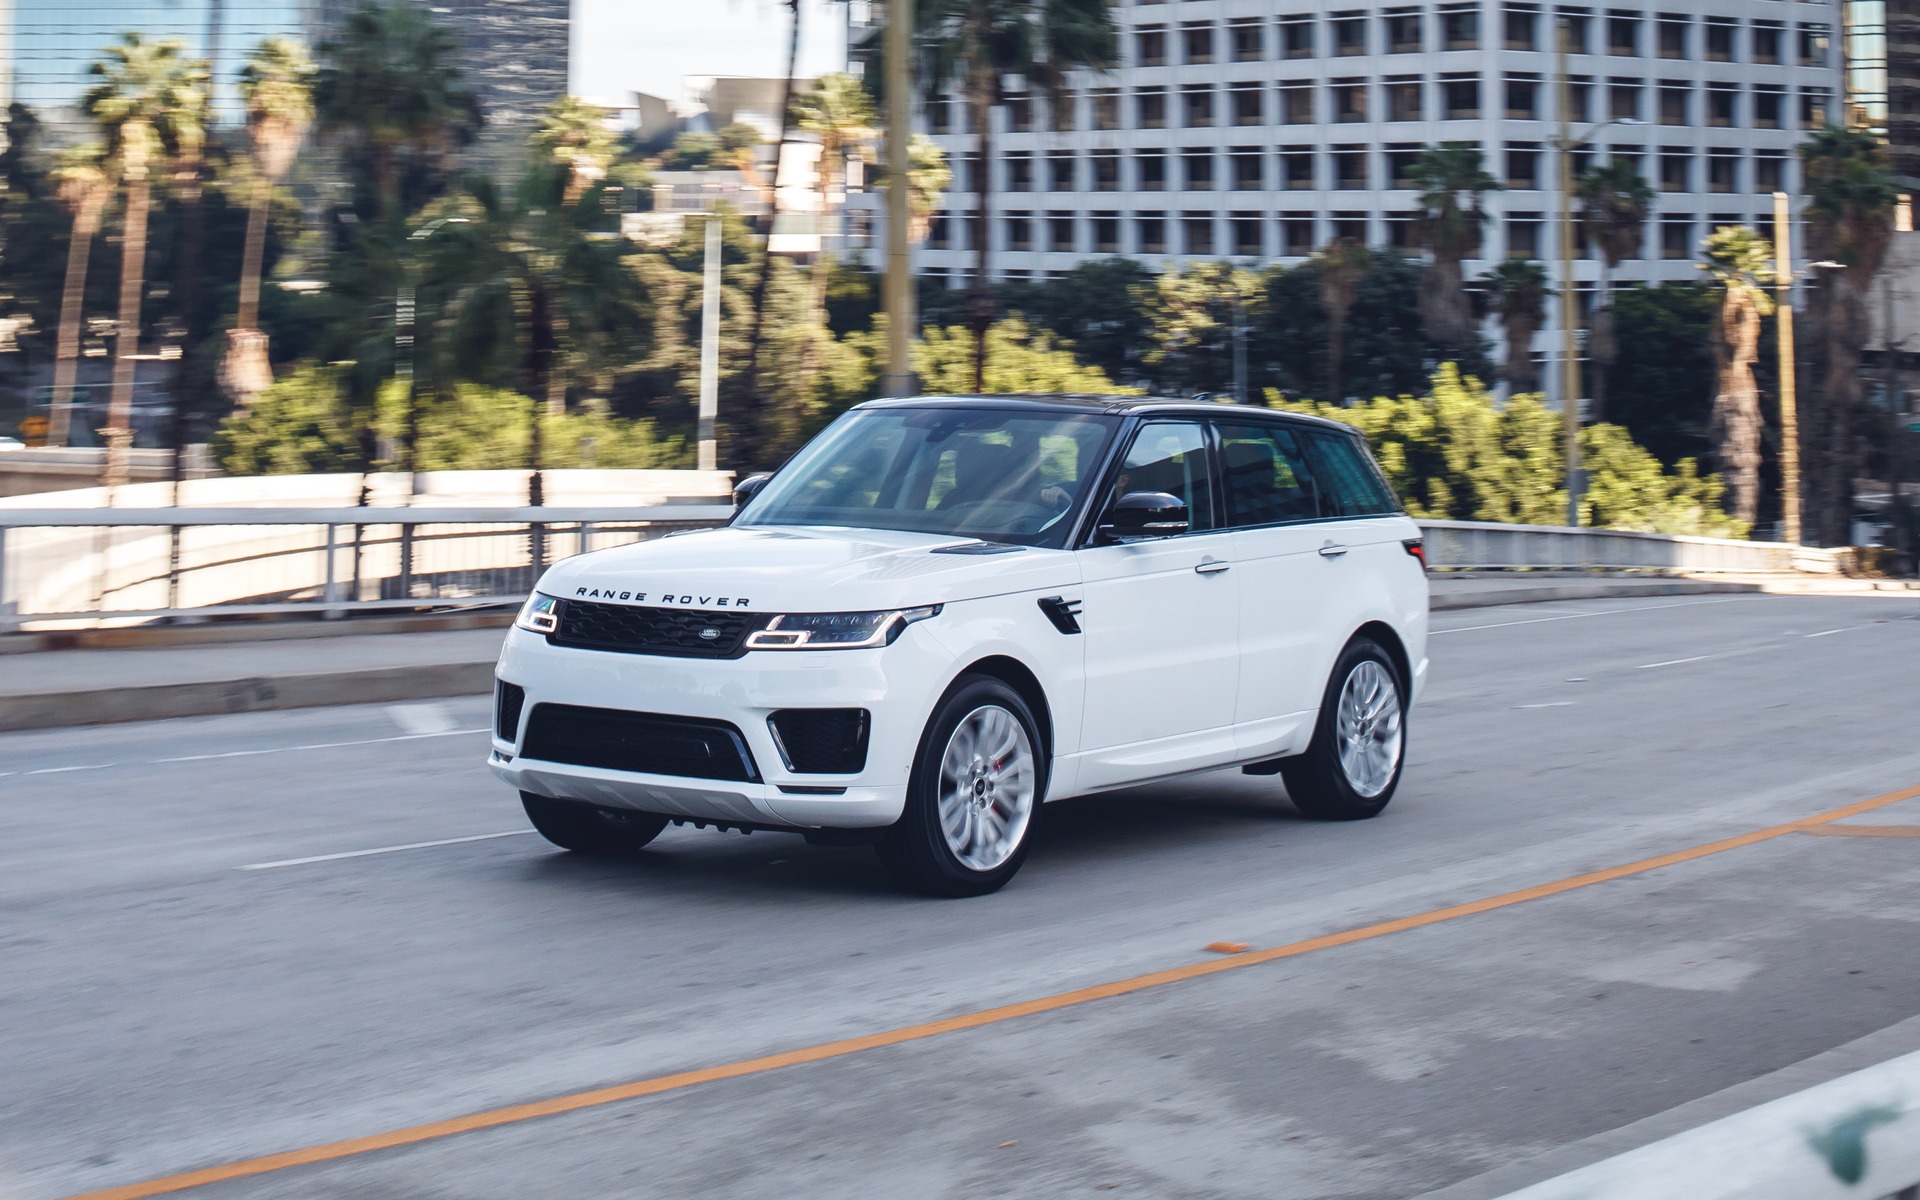 Range Rover Sport Hse Weight  . Like Its Discovery Sister Car, The 2010 Range Rover Sport Gets A Major Makeover.